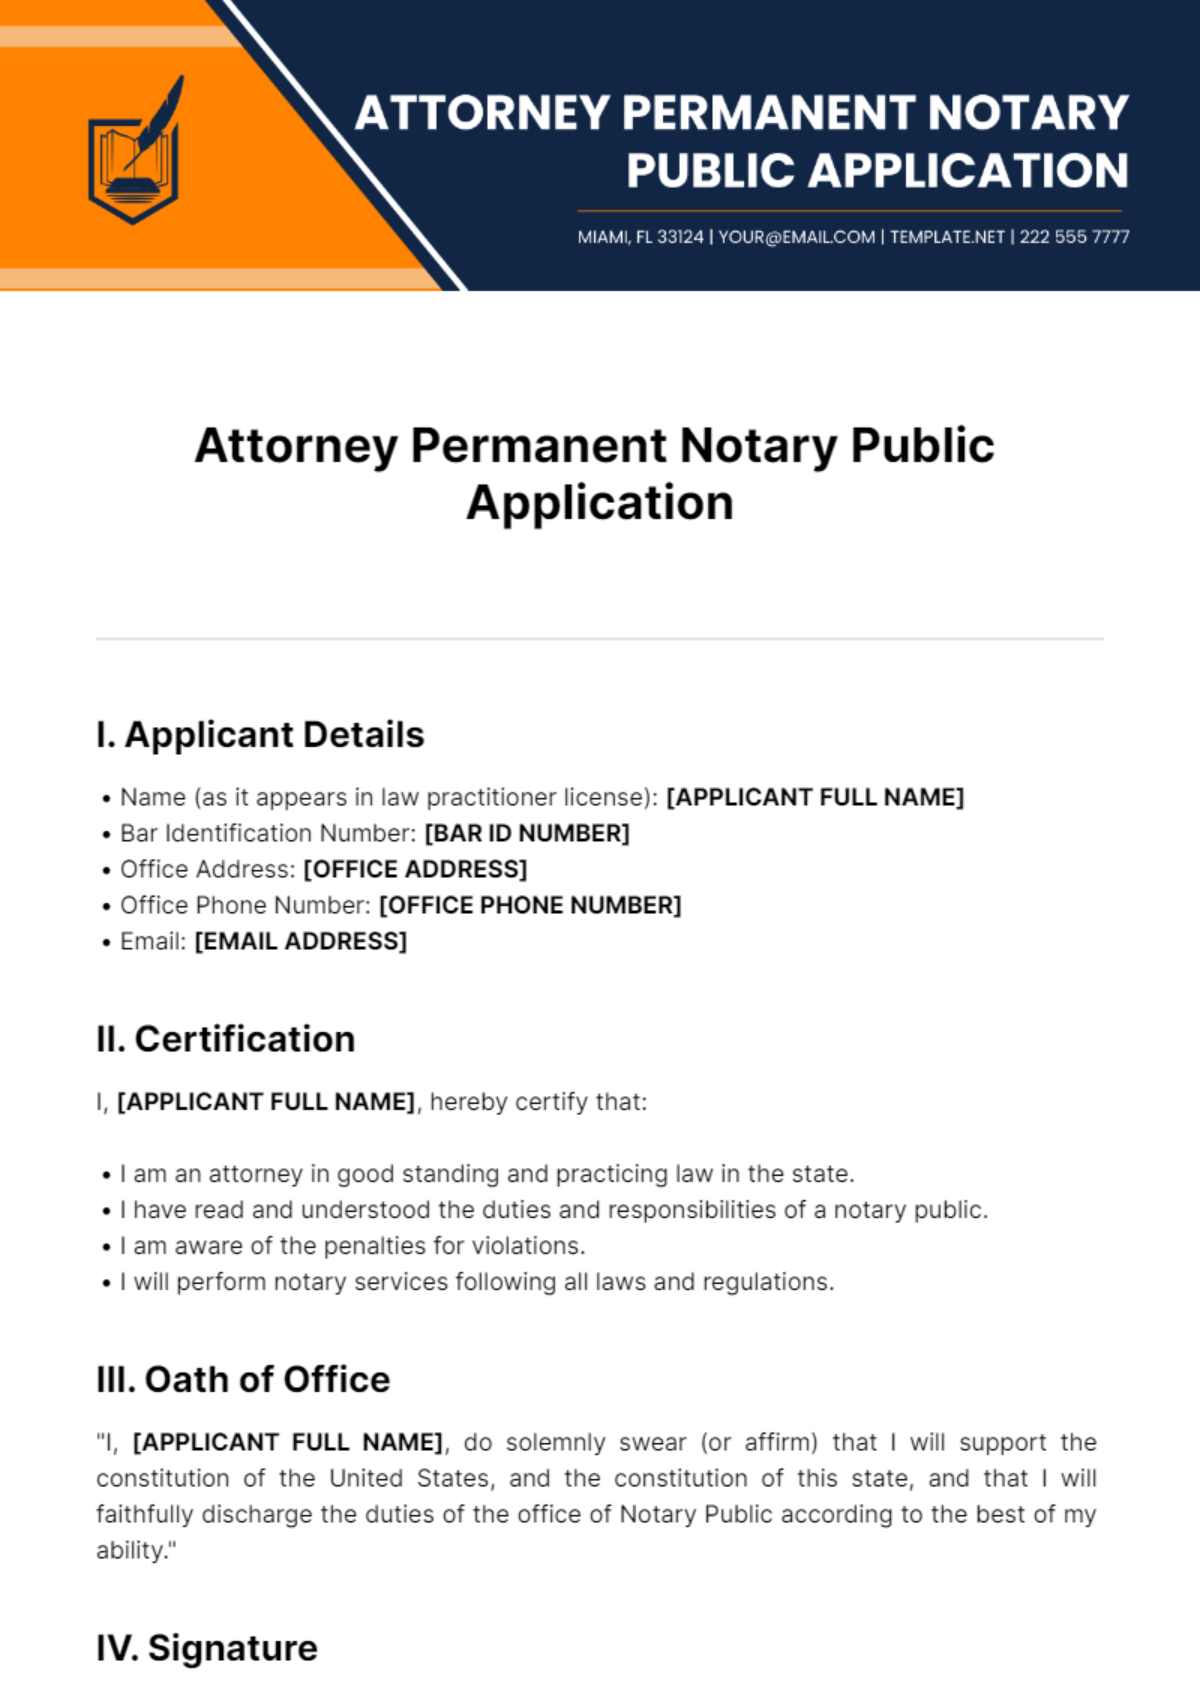 Attorney Permanent Notary Public Application Template